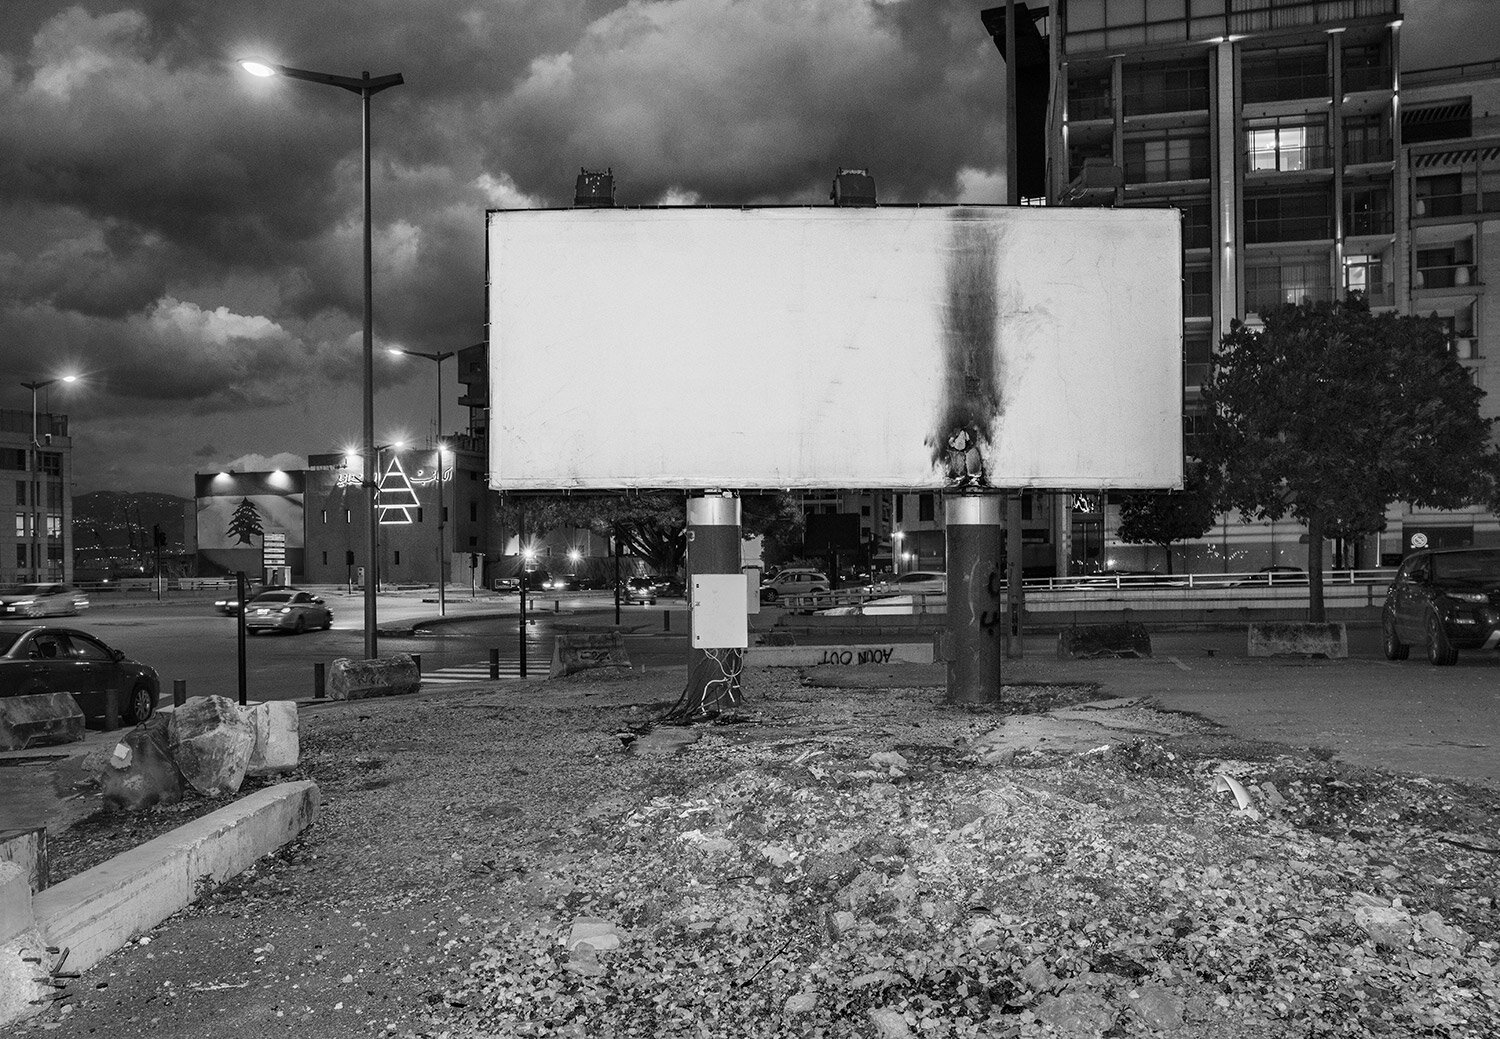   Signs after protests.  Beirut, Lebanon, 2020   Archival fiber inkjet print   16 x 23 inches 